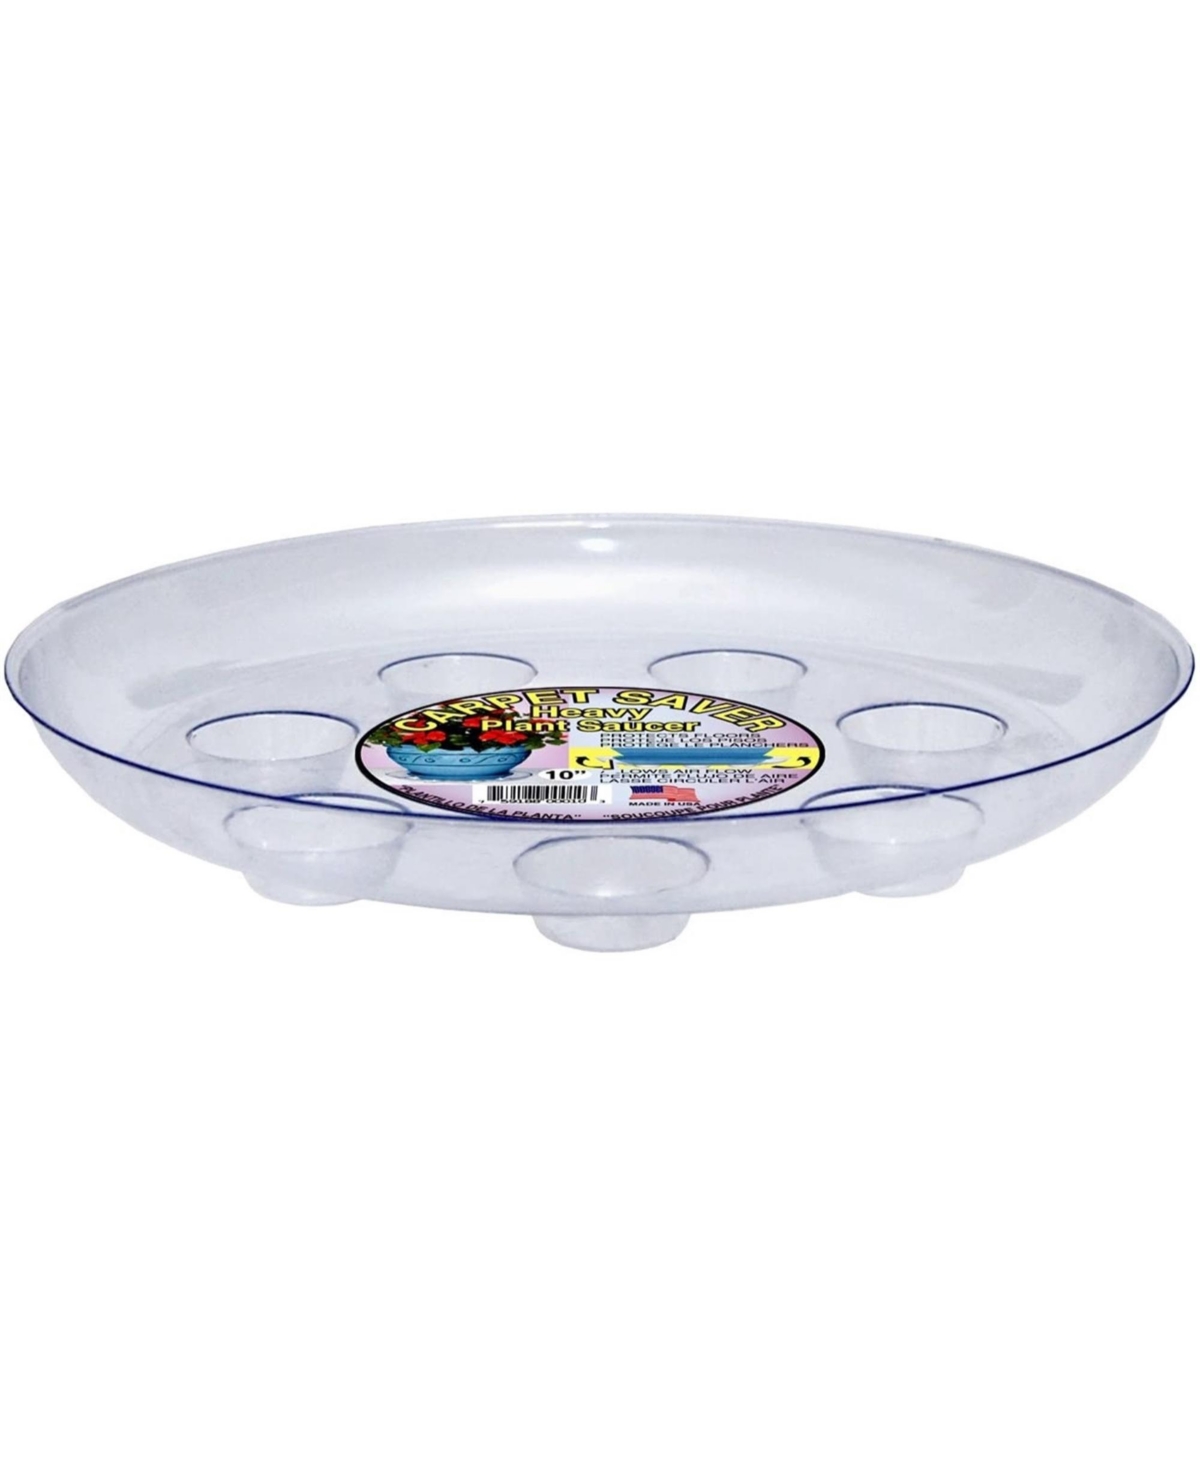 Heavy Gauge Footed Plastic Saucer, Clear, 10-Inch - Clear